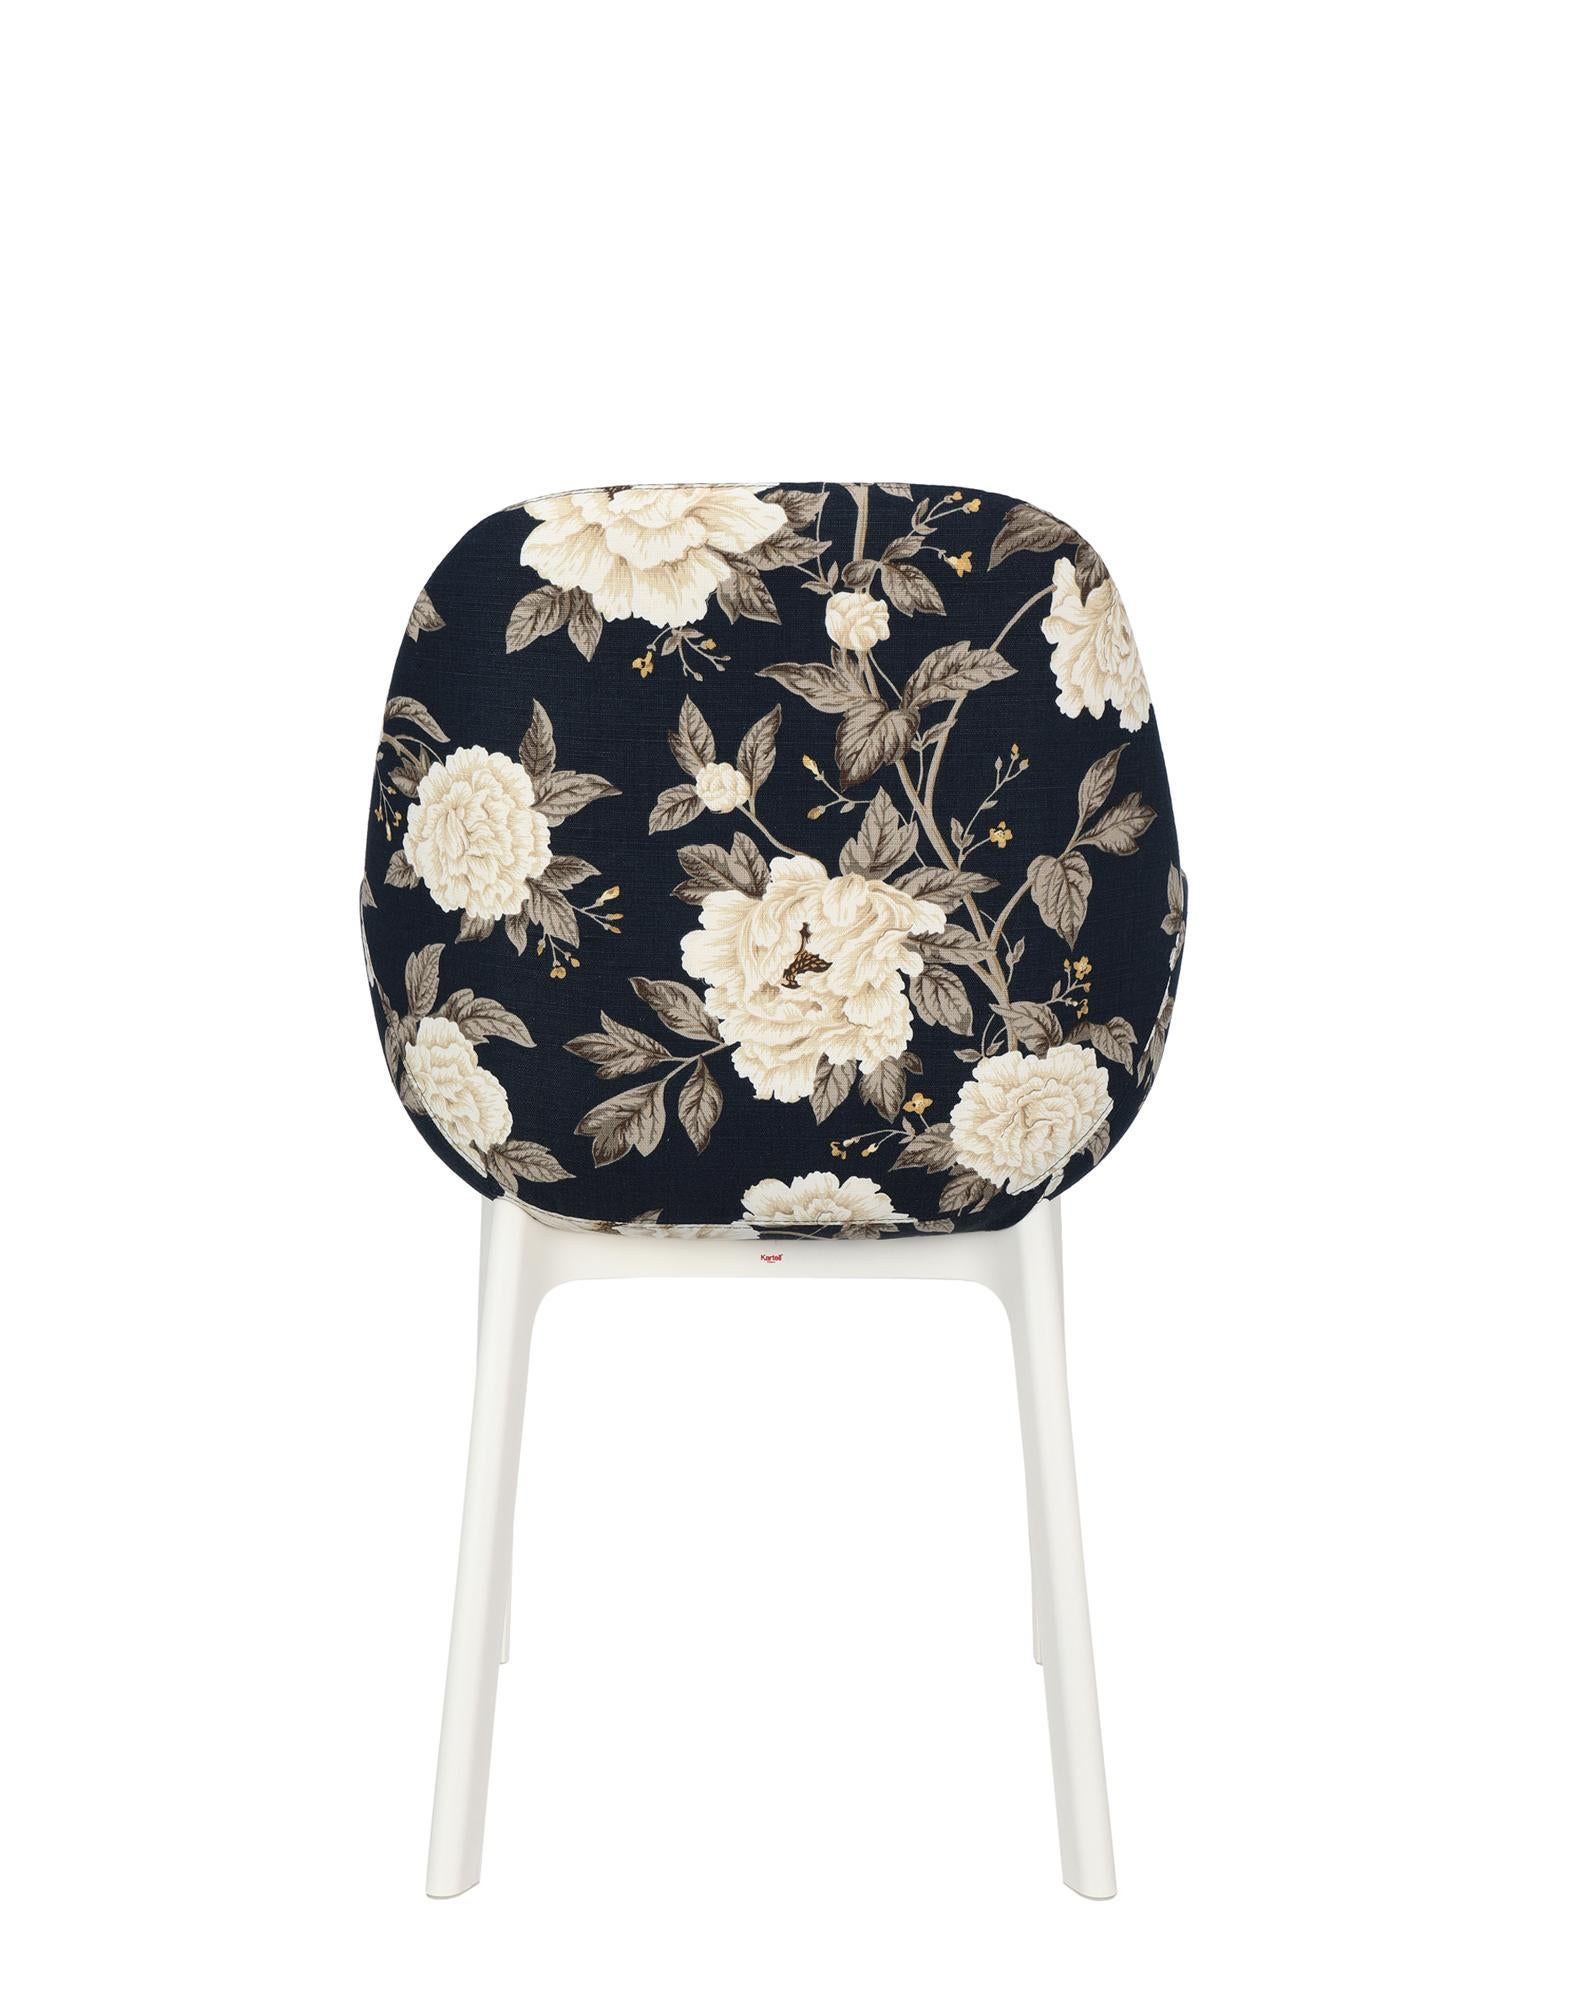 Kartell Clap Chair by Patricia Urquiola in Peony Pattern In New Condition For Sale In Brooklyn, NY